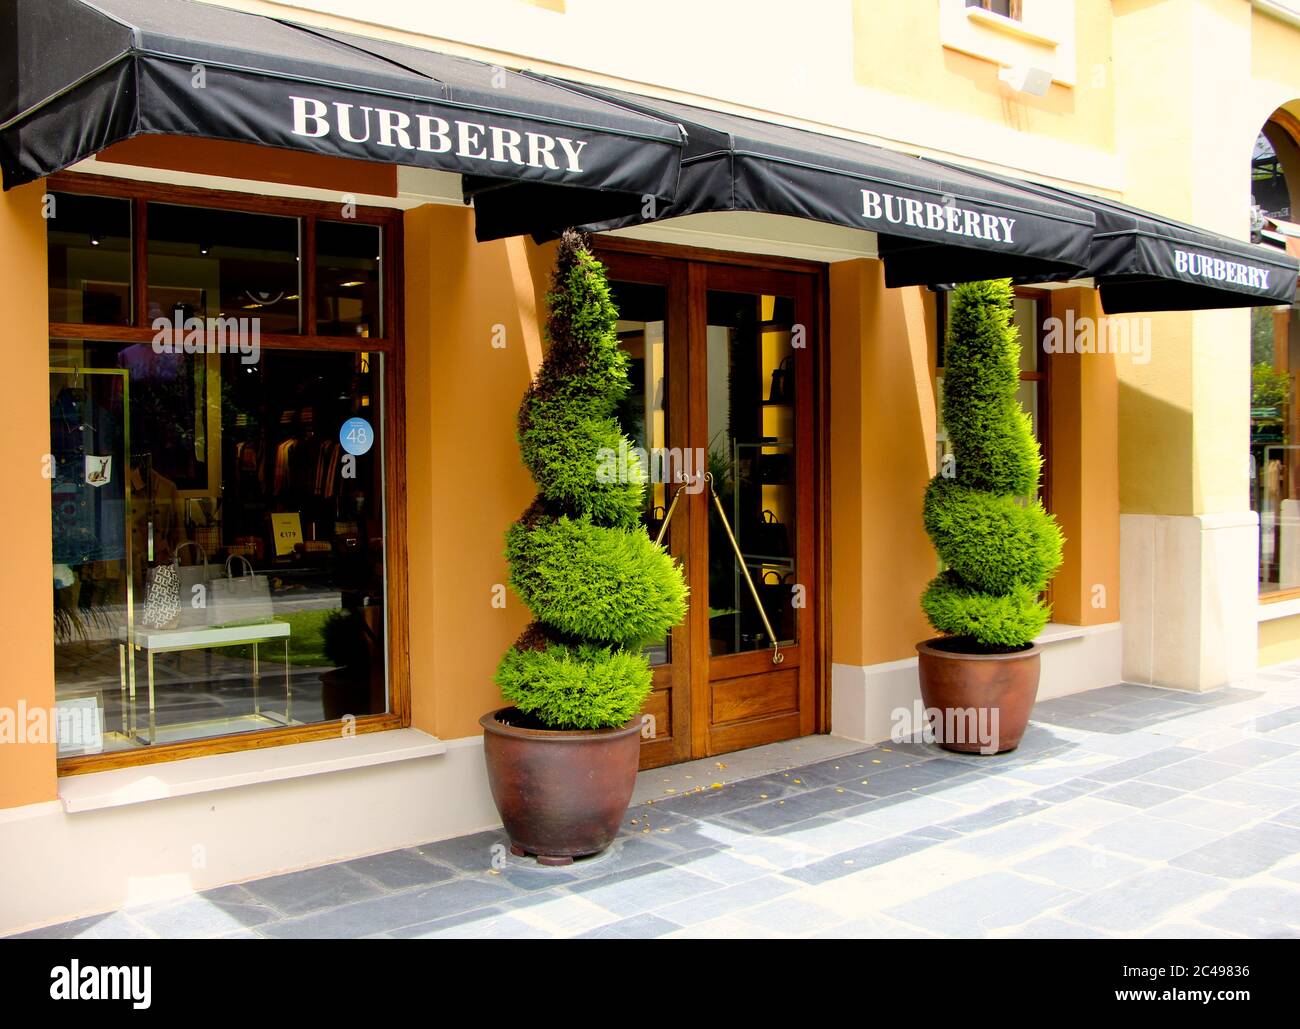 Burberry Shop Front High Resolution Stock Photography and Images - Alamy